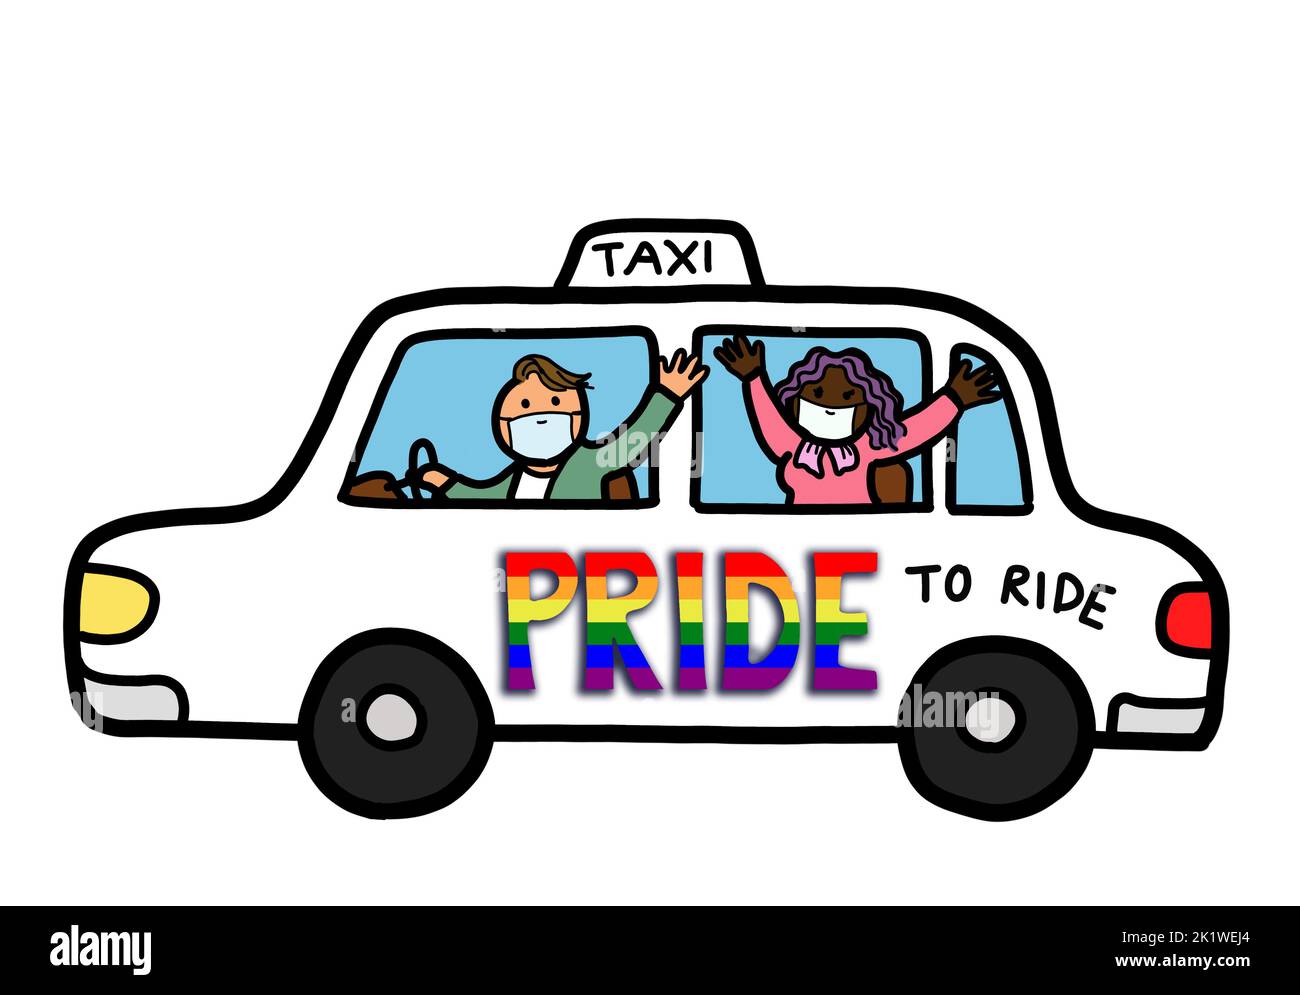 A taxi cab with gay pride rainbow LGBTQ symbol with a driver and lesbian woman passenger. Equality and diversity concept. Stock Photo